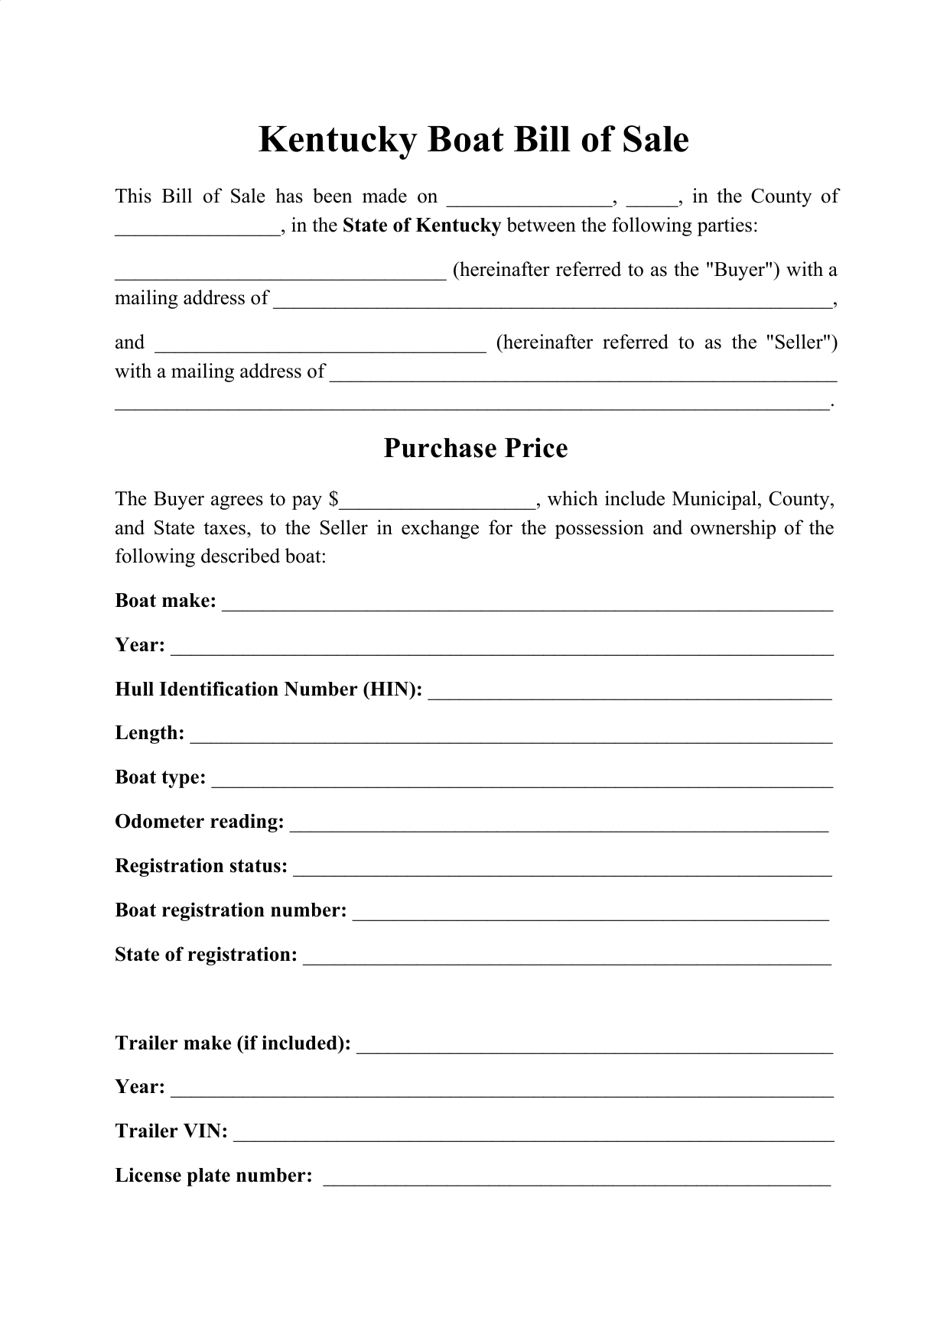 Boat Bill of Sale Form - Kentucky, Page 1